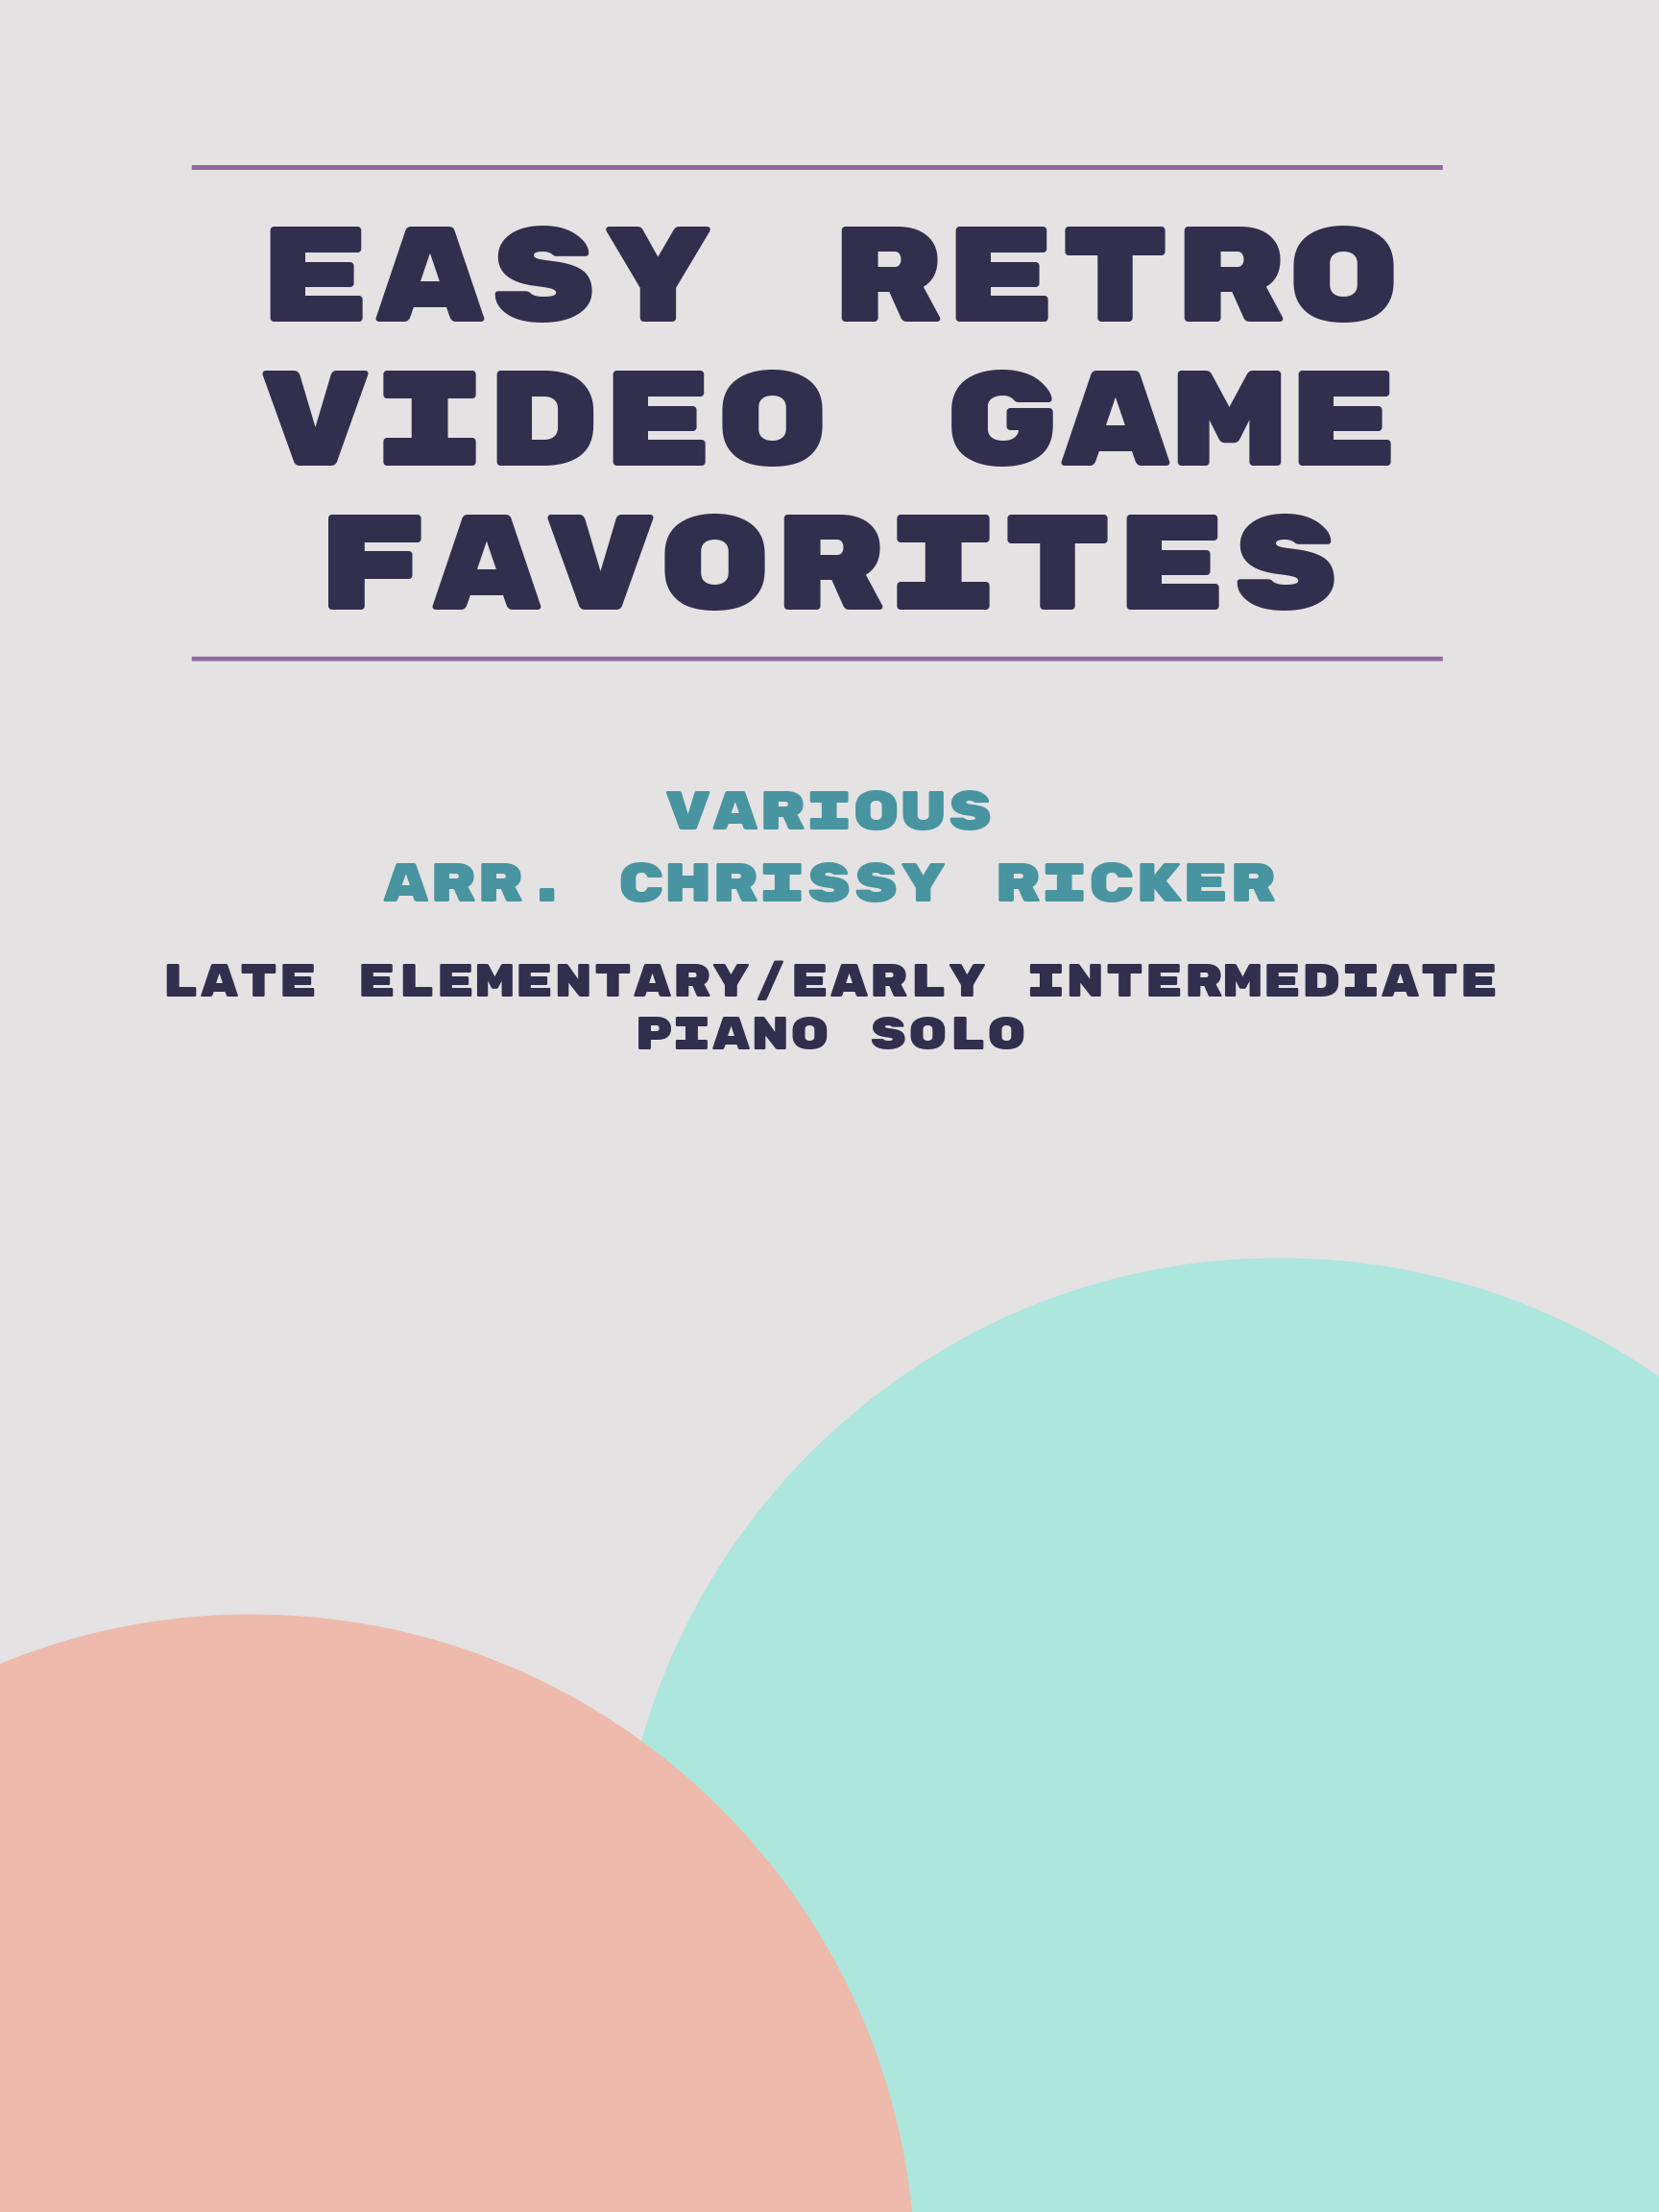 Easy Retro Video Game Favorites by Various